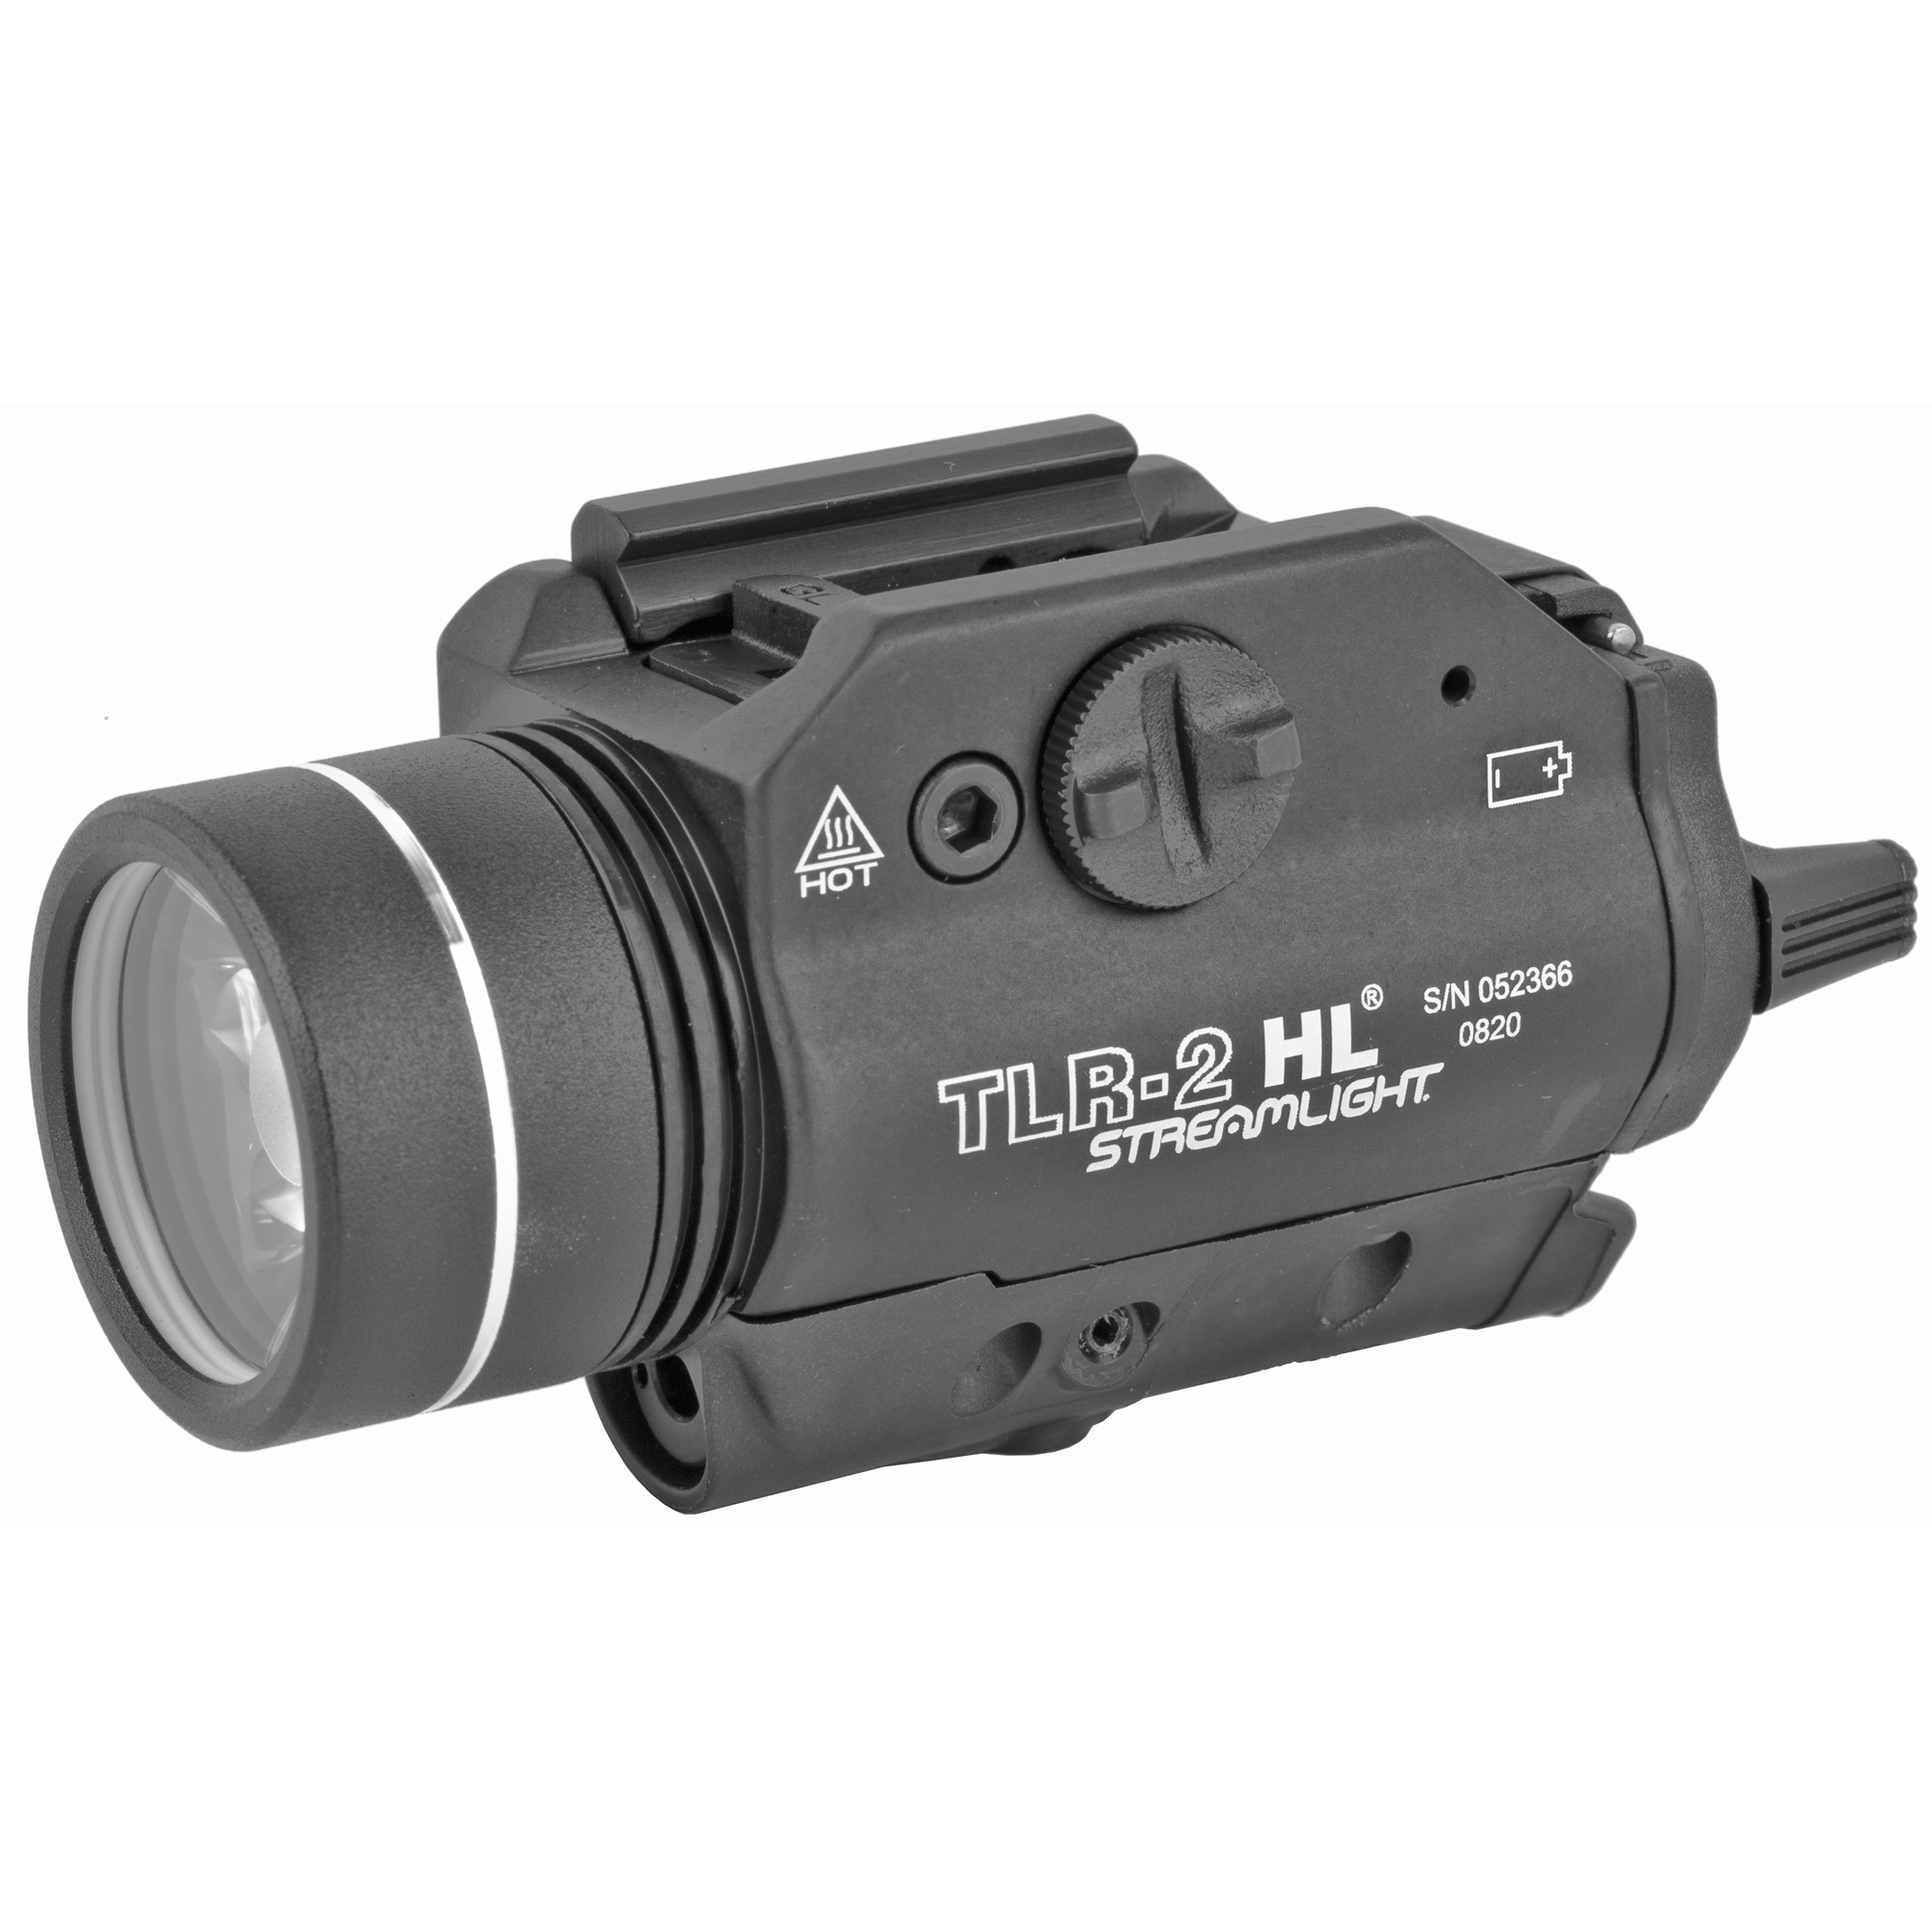 Streamlight TLR-2, HL LED Weapon-light and Red Laser, 630 Lumen Toggle Switch, Fits Picatinny or Glock-Style Mount Rails, Black